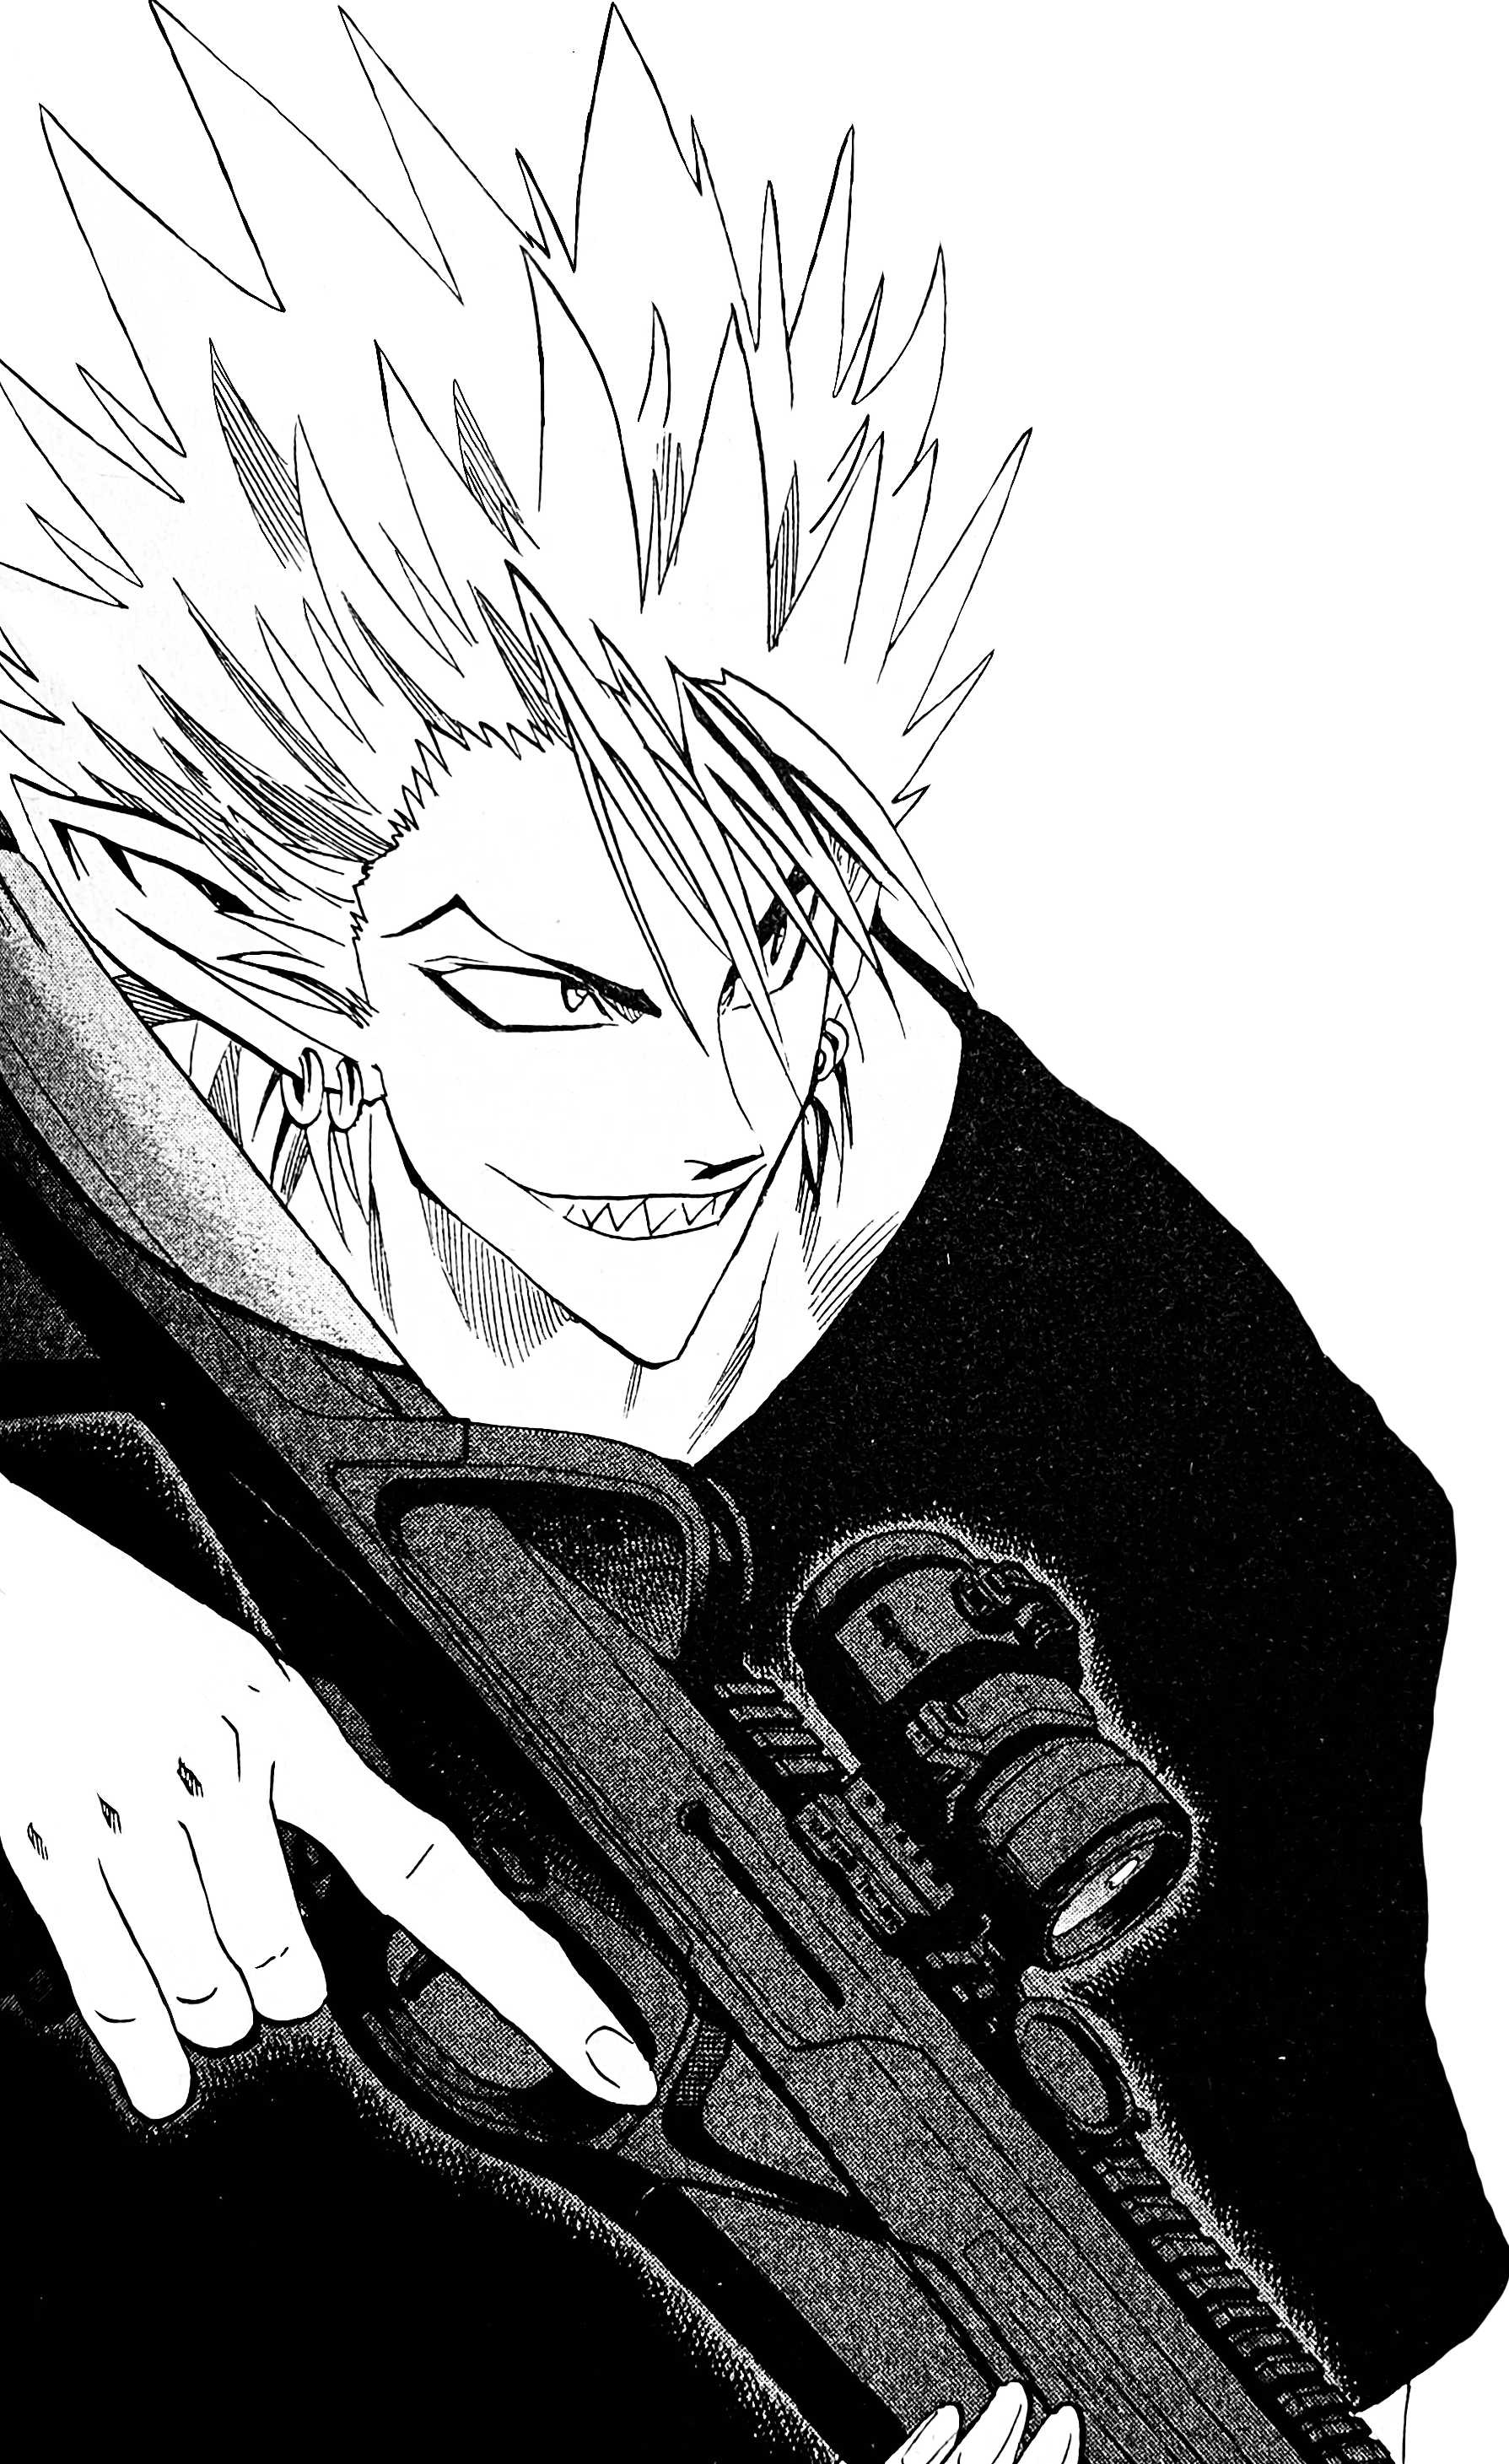 A transparent illustration of Hiruma dressed in a black shirt and grinning with his sharp fangs as he stares off to the side. His hair is spiky and blond, his features are sharp and demonic, and each of his long, elf-like ears are pearced with a pair of dark hoop earrings. He's armed with a machine gun, his long finger off the trigger.